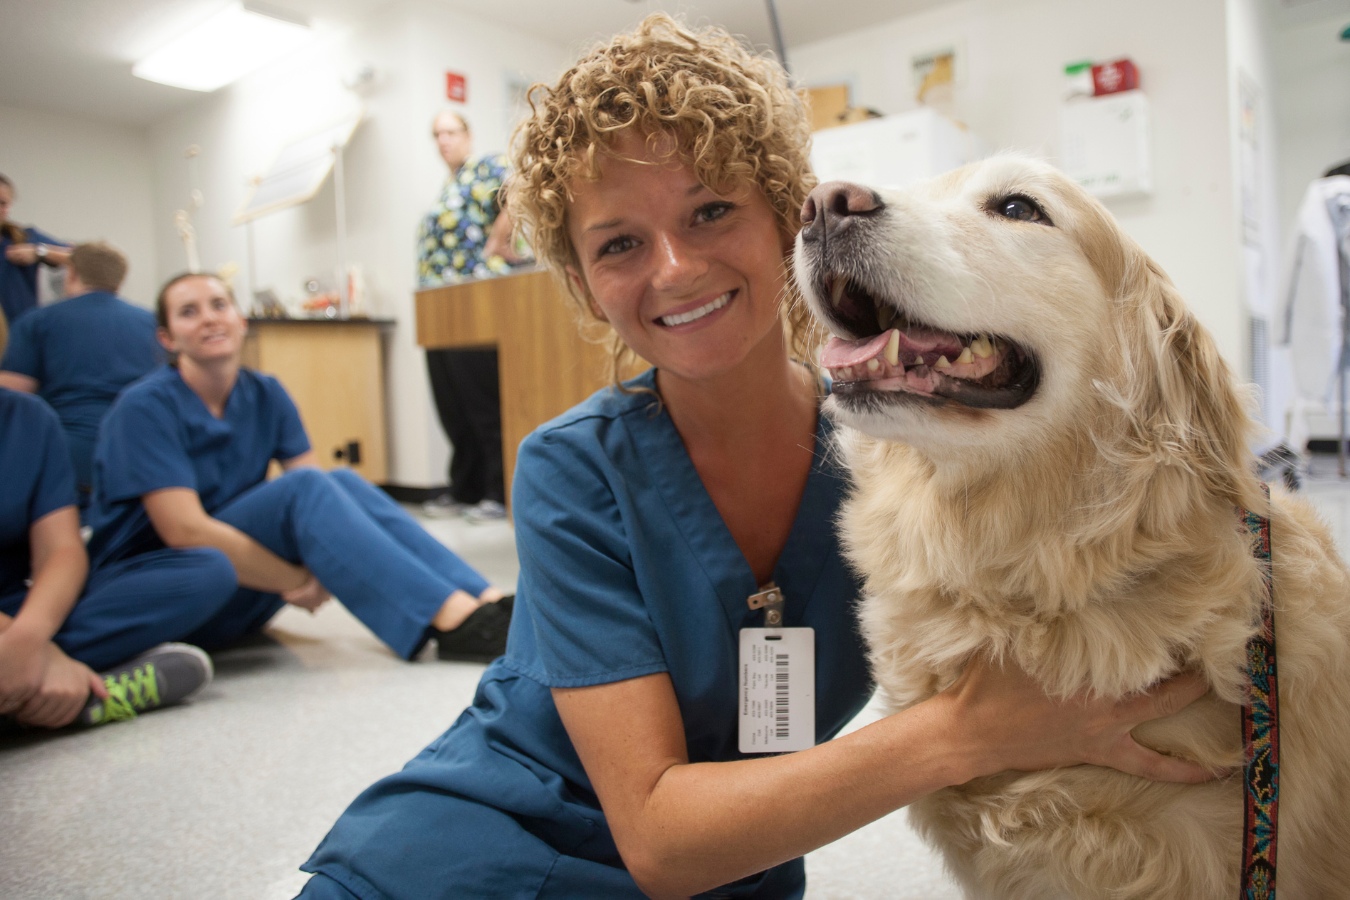 Joyful female veterinary nursing student smiling while interacting with a dog in the classroom.